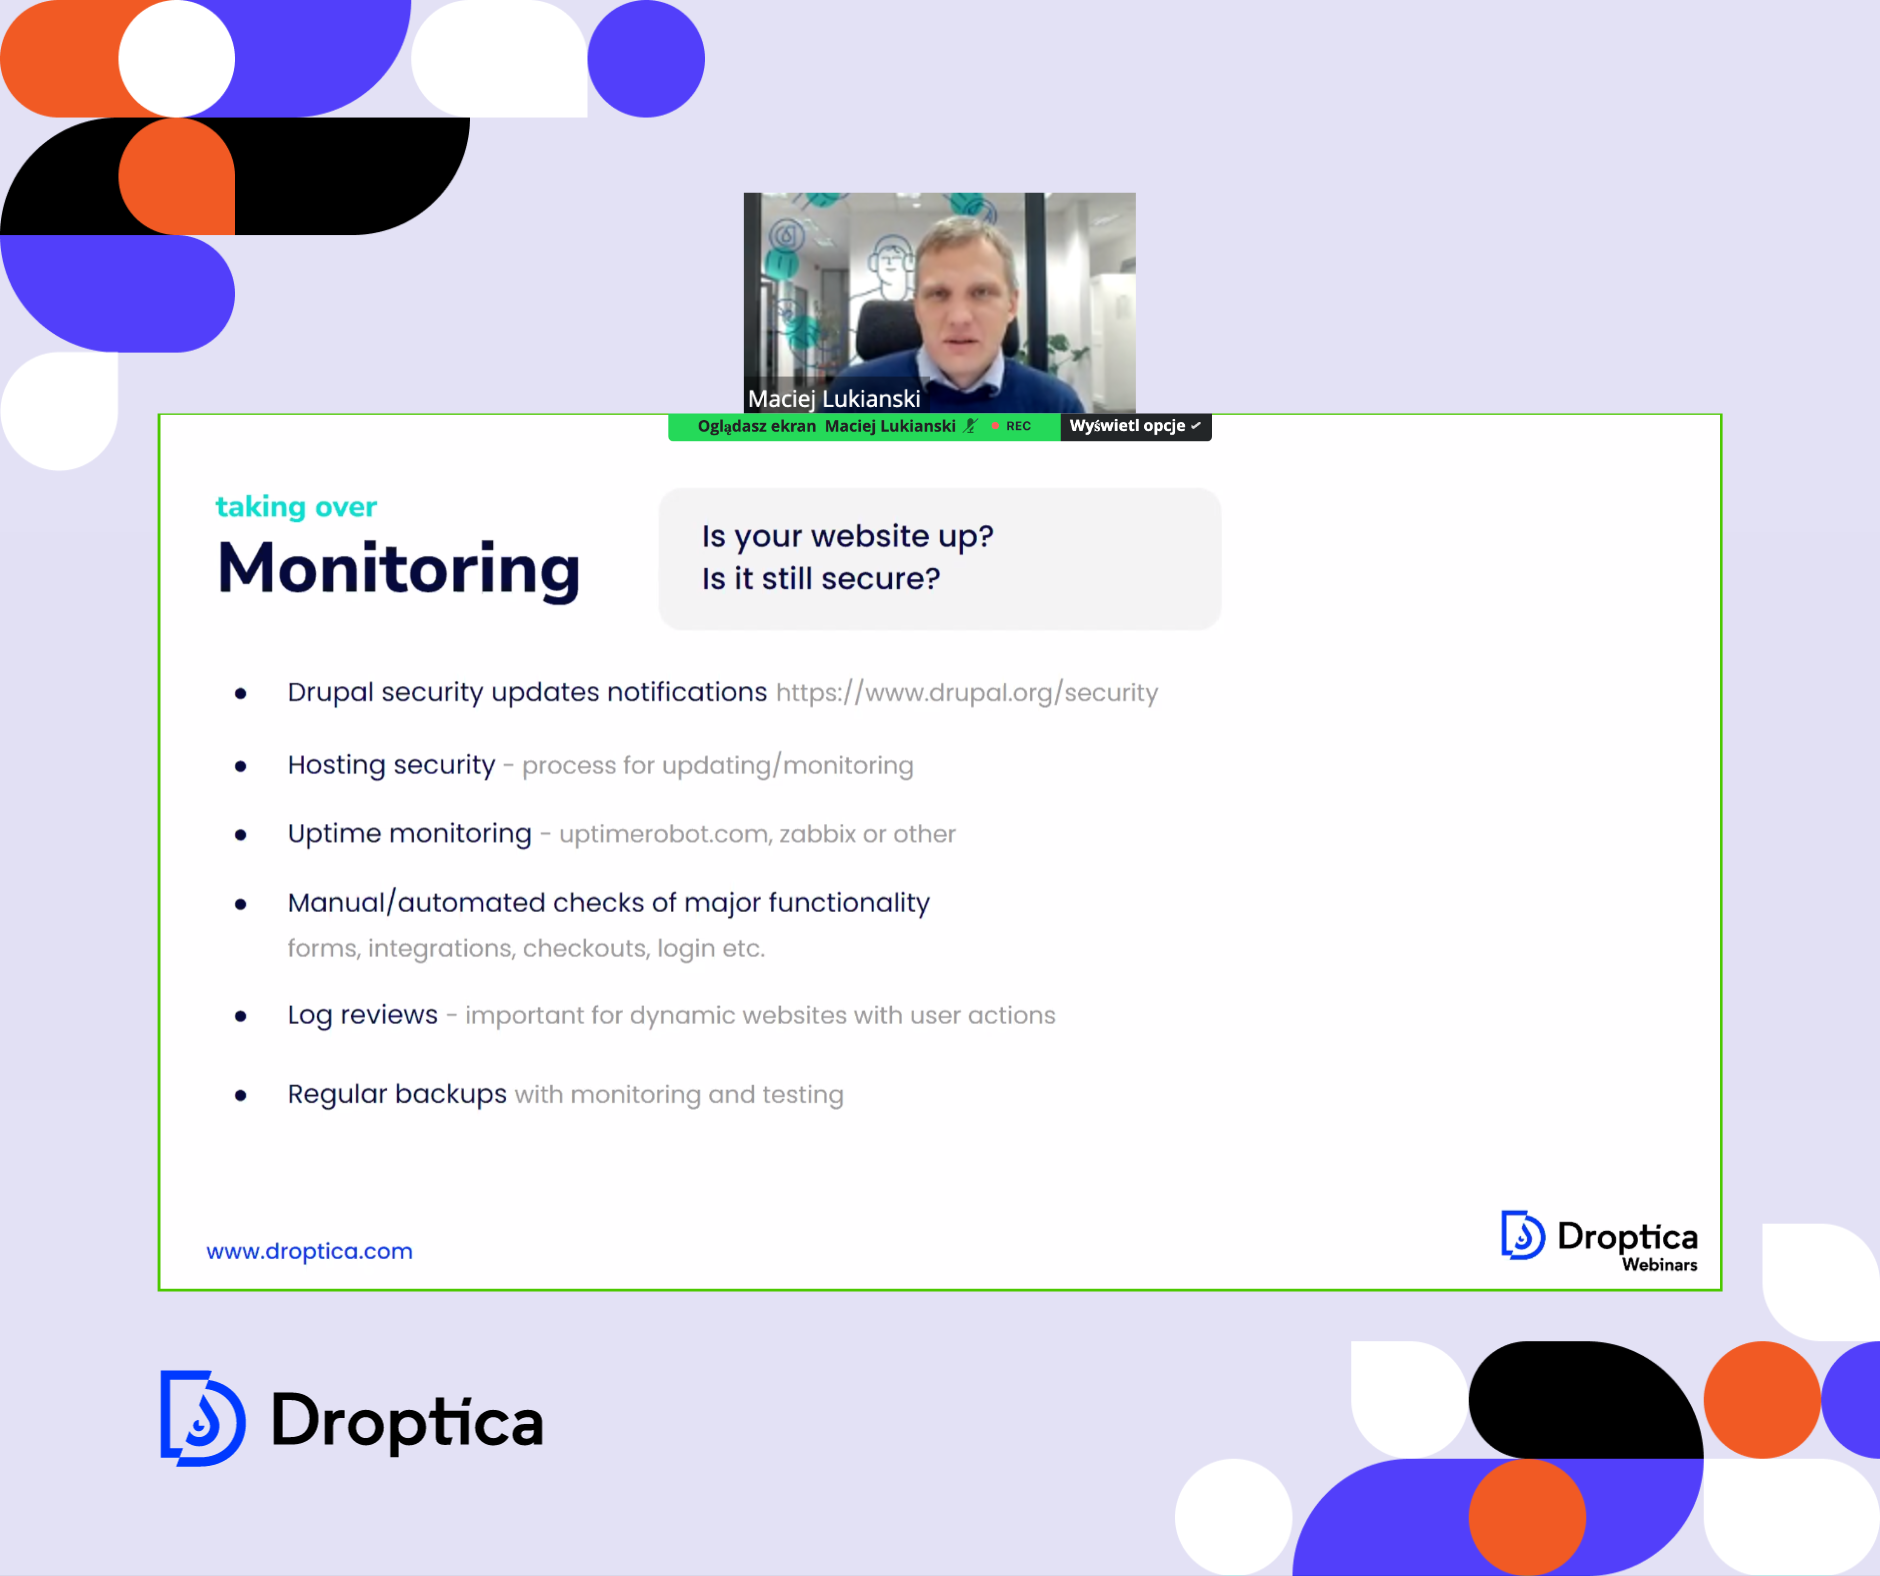 Maciej Lukianski led a webinar on maintaining and supporting Drupal websites, sharing practical tips